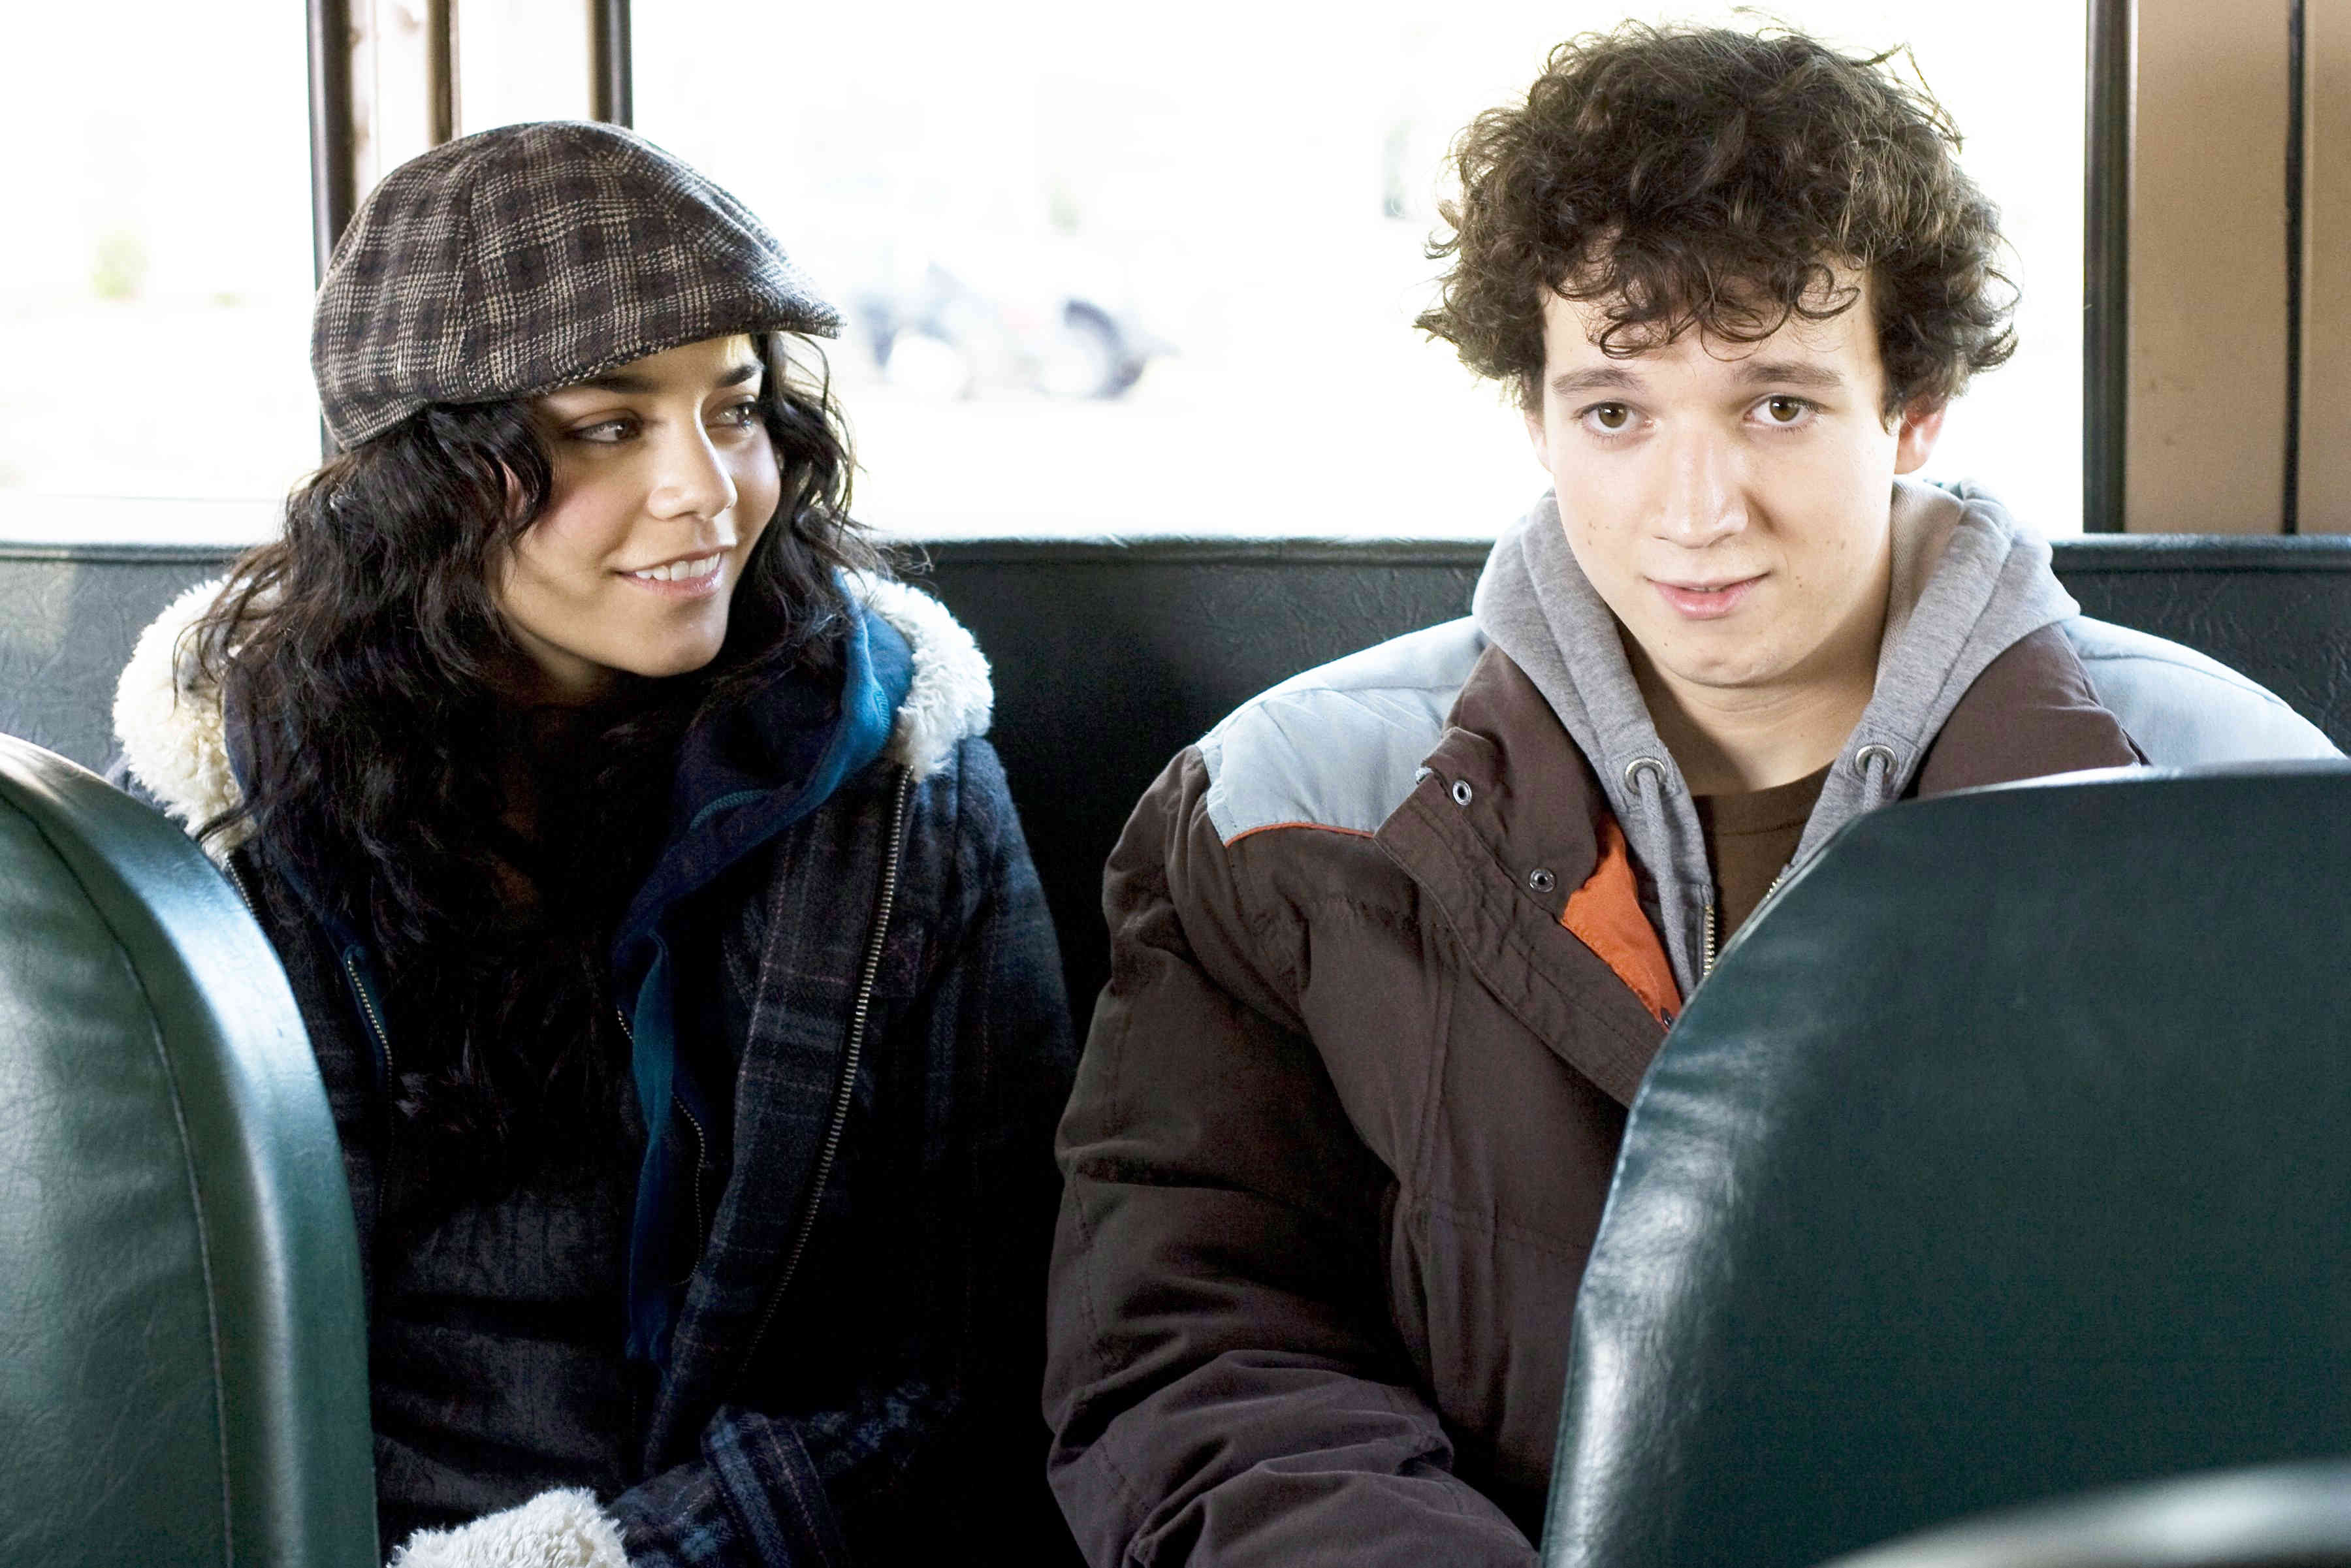 Vanessa Hudgens stars as Sam and Gaelan Connell stars as Will Burton in Summit Entertainment's Bandslam (2009). Photo credit by Van Redin.